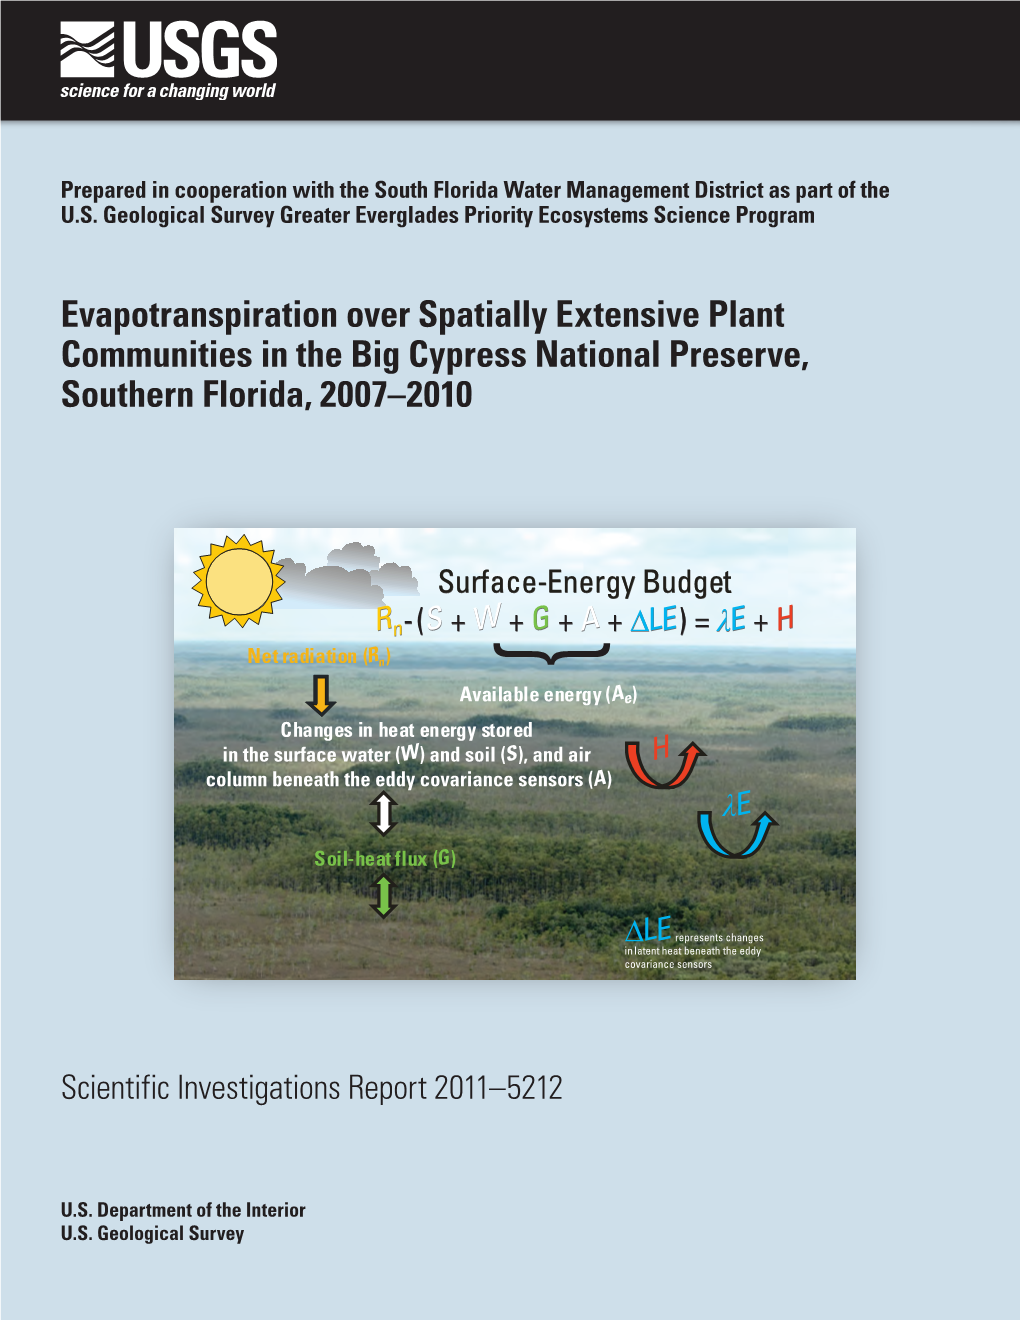 Evapotranspiration Over Spatially Extensive Plant Communities in the Big Cypress National Preserve, Southern Florida, 2007–2010